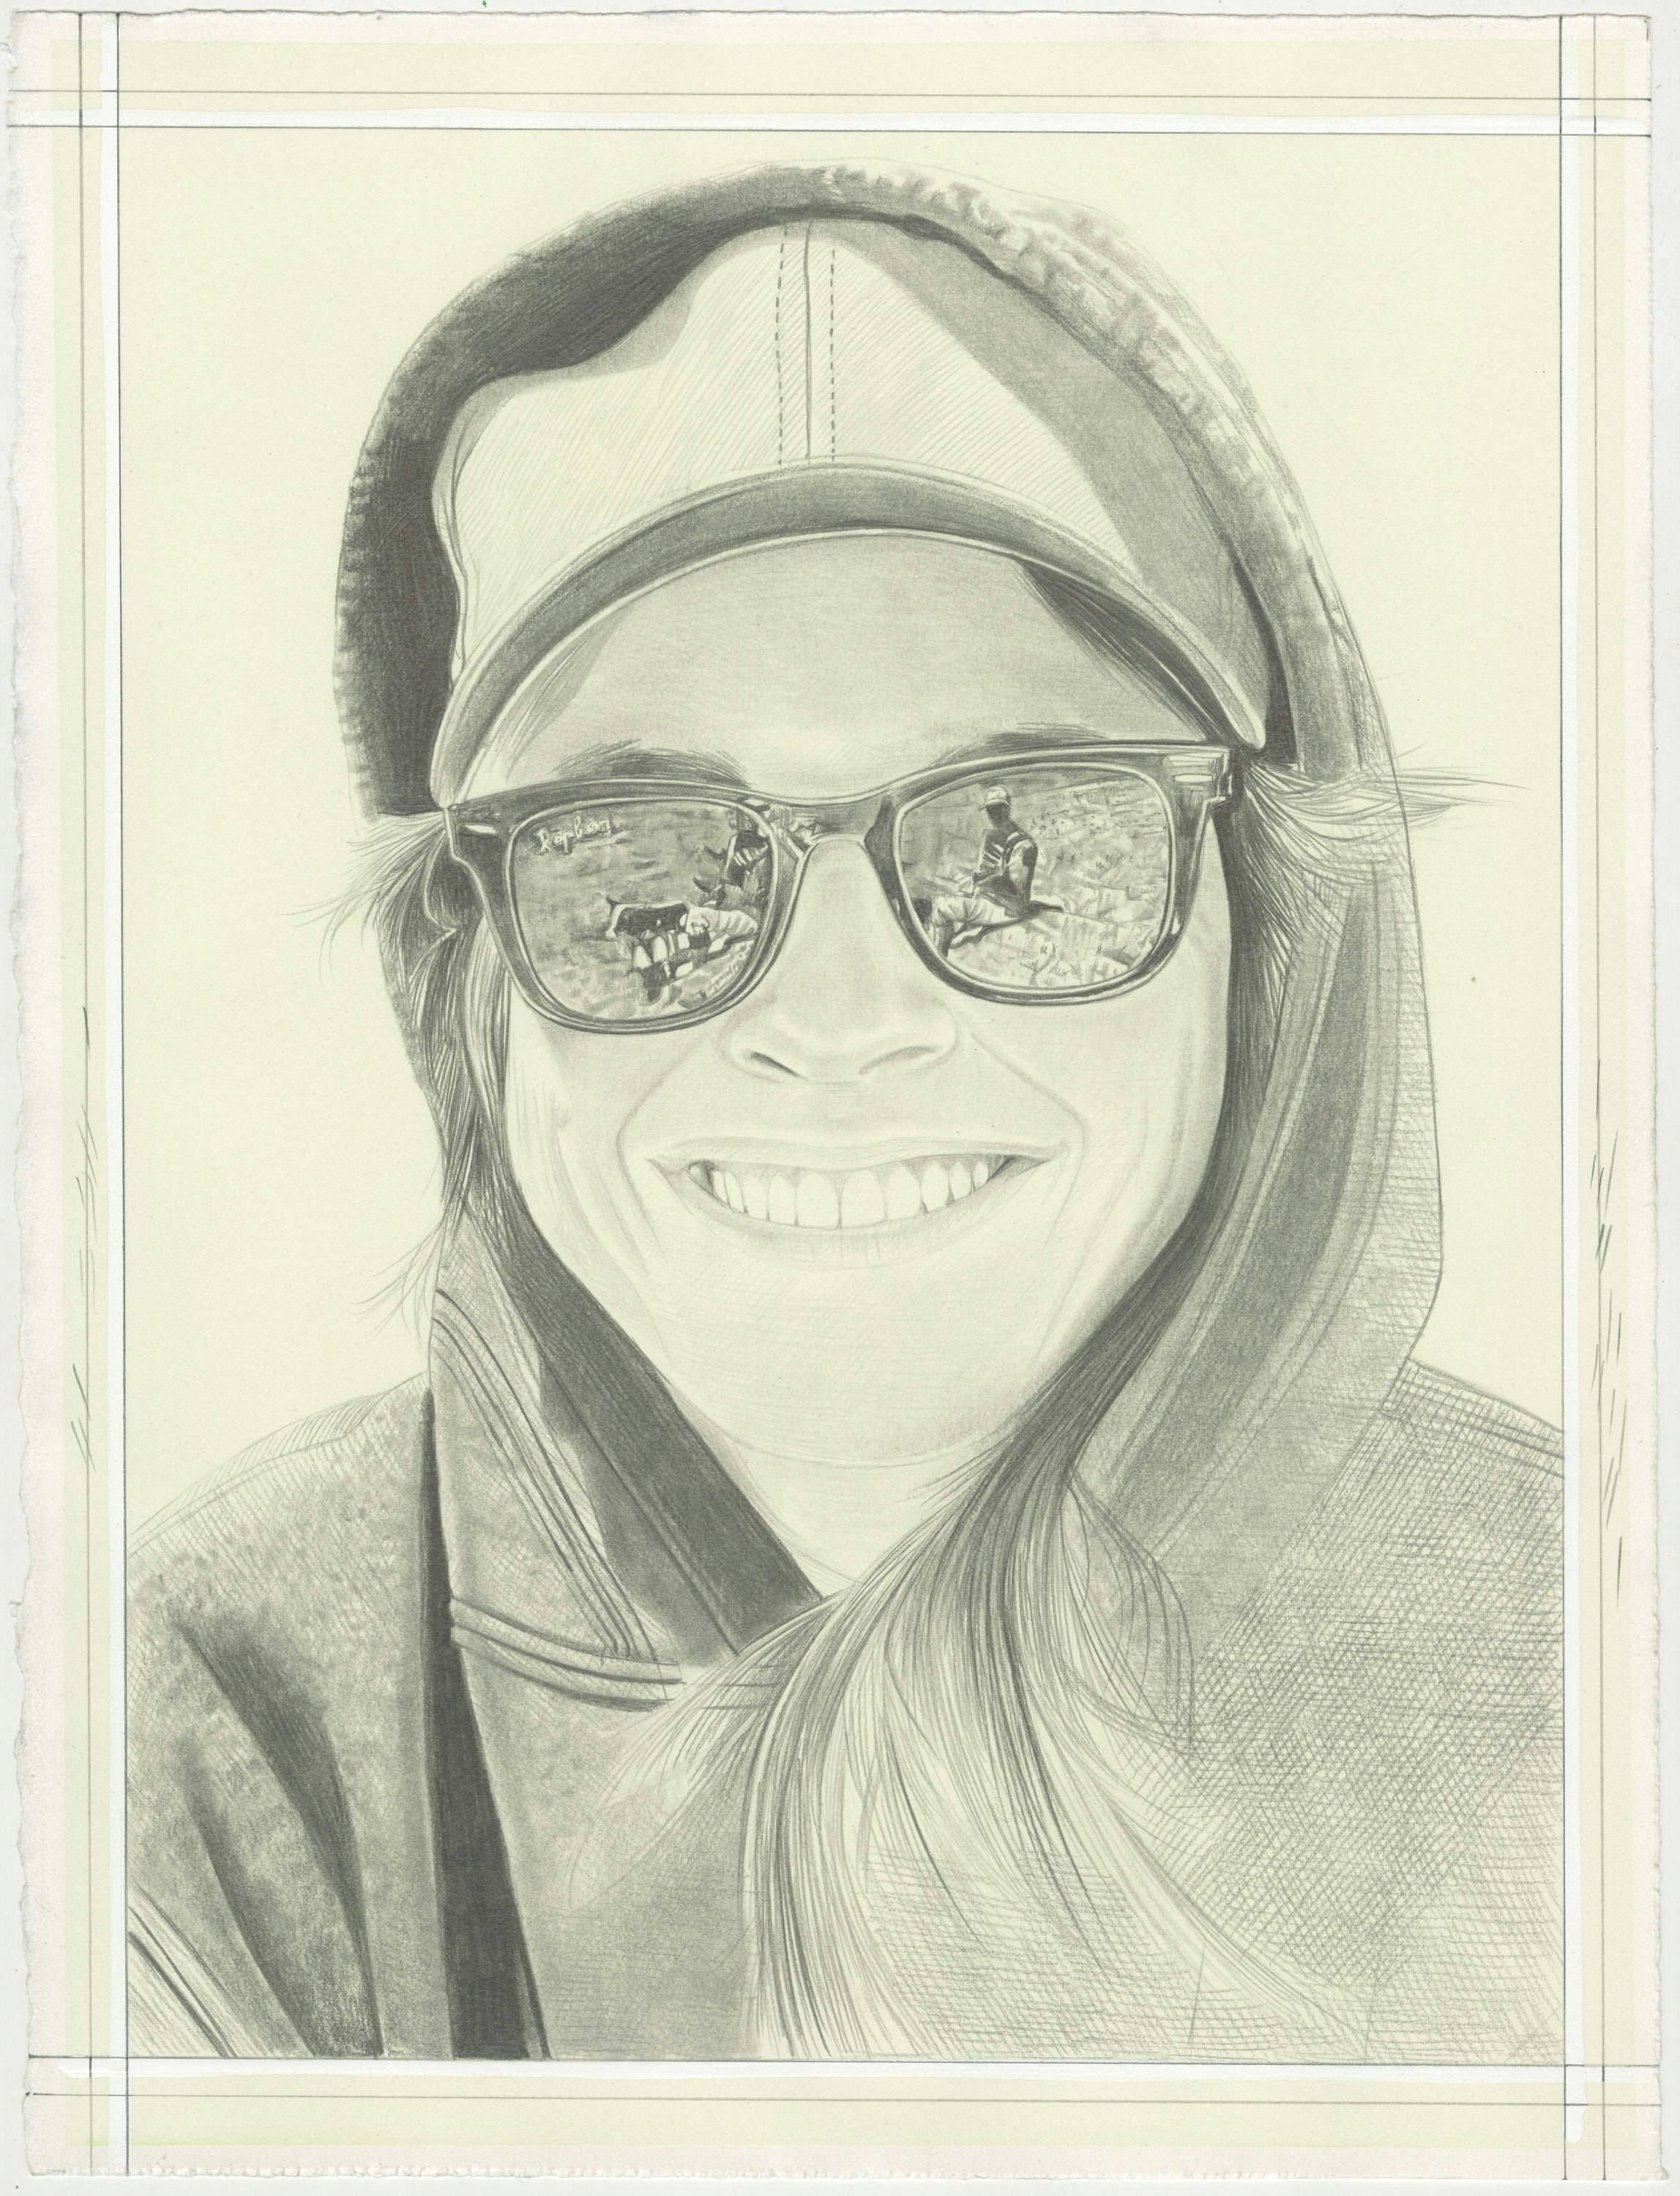 Portrait of Lucy Raven, pencil on paper by Phong H. Bui.